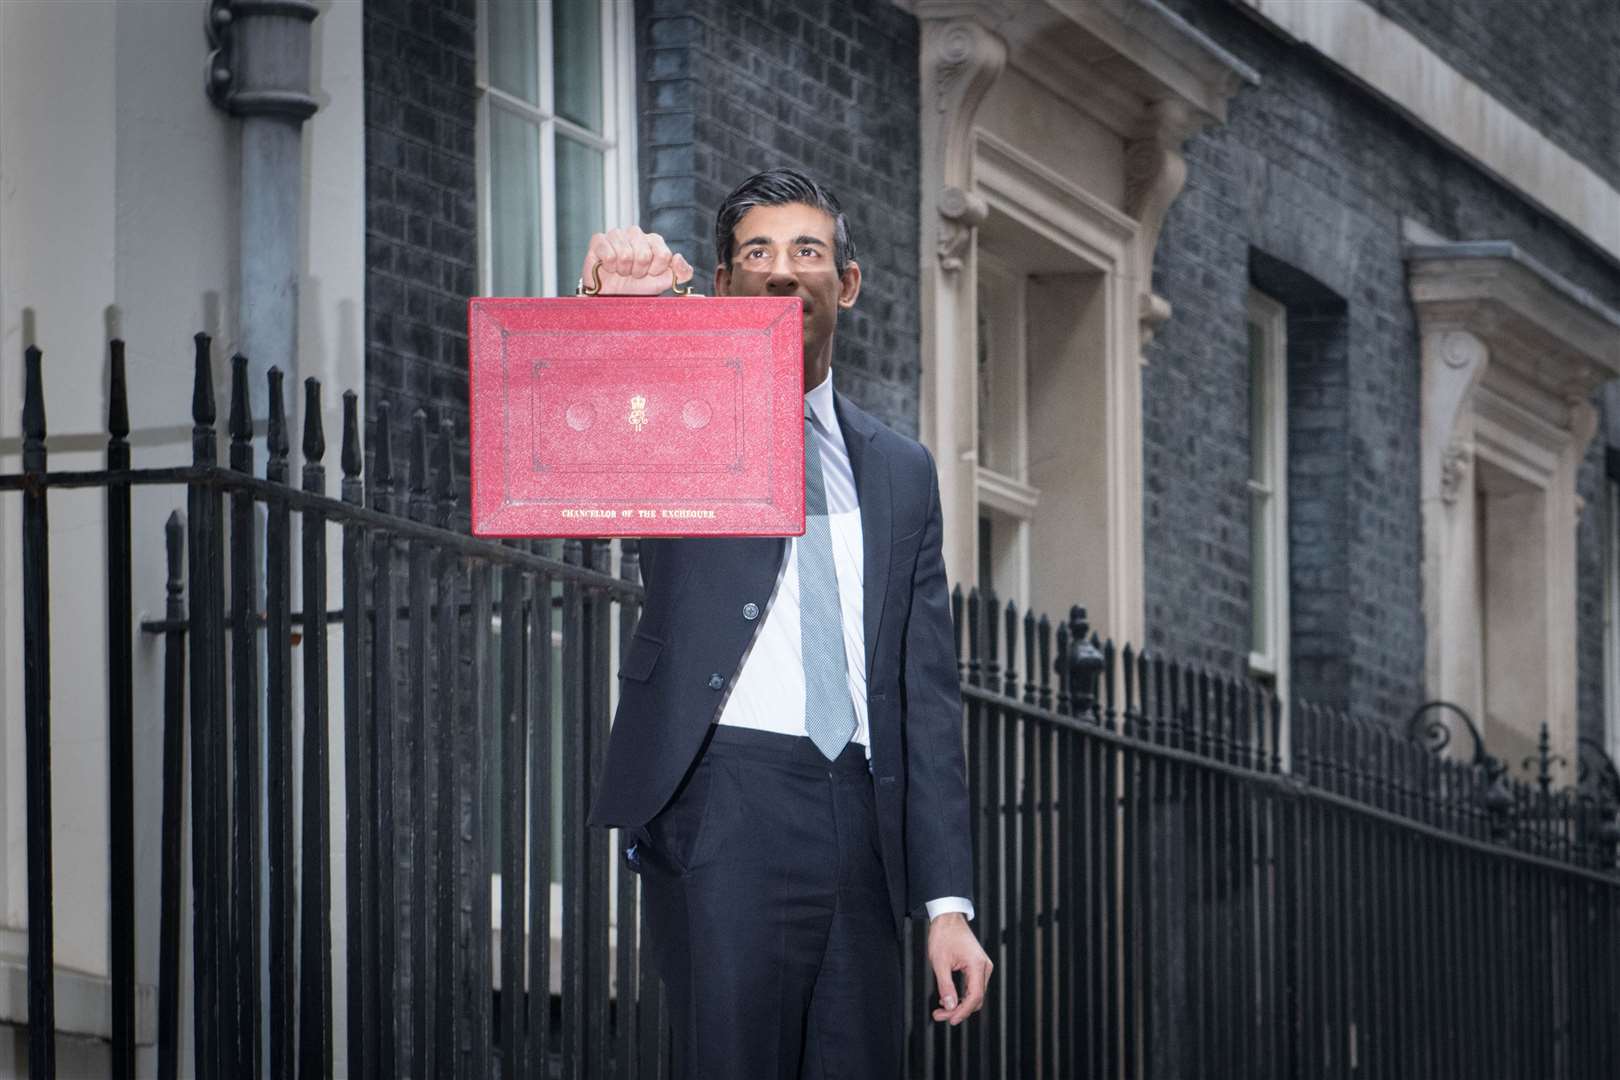 Chancellor of the Exchequer, Rishi Sunak outside 11 Downing Street, London, before heading to the House of Commons to deliver his Budget in March (PA)